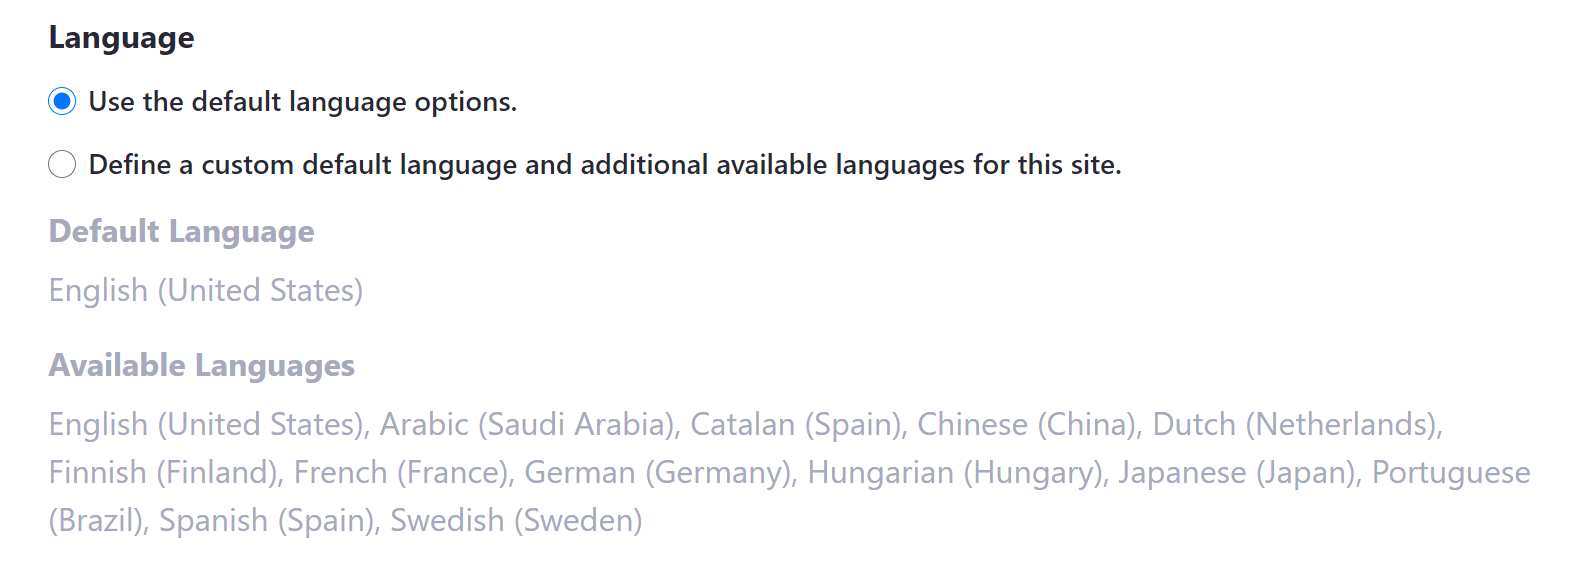 You can update language options through the Languages tab of Site Settings.